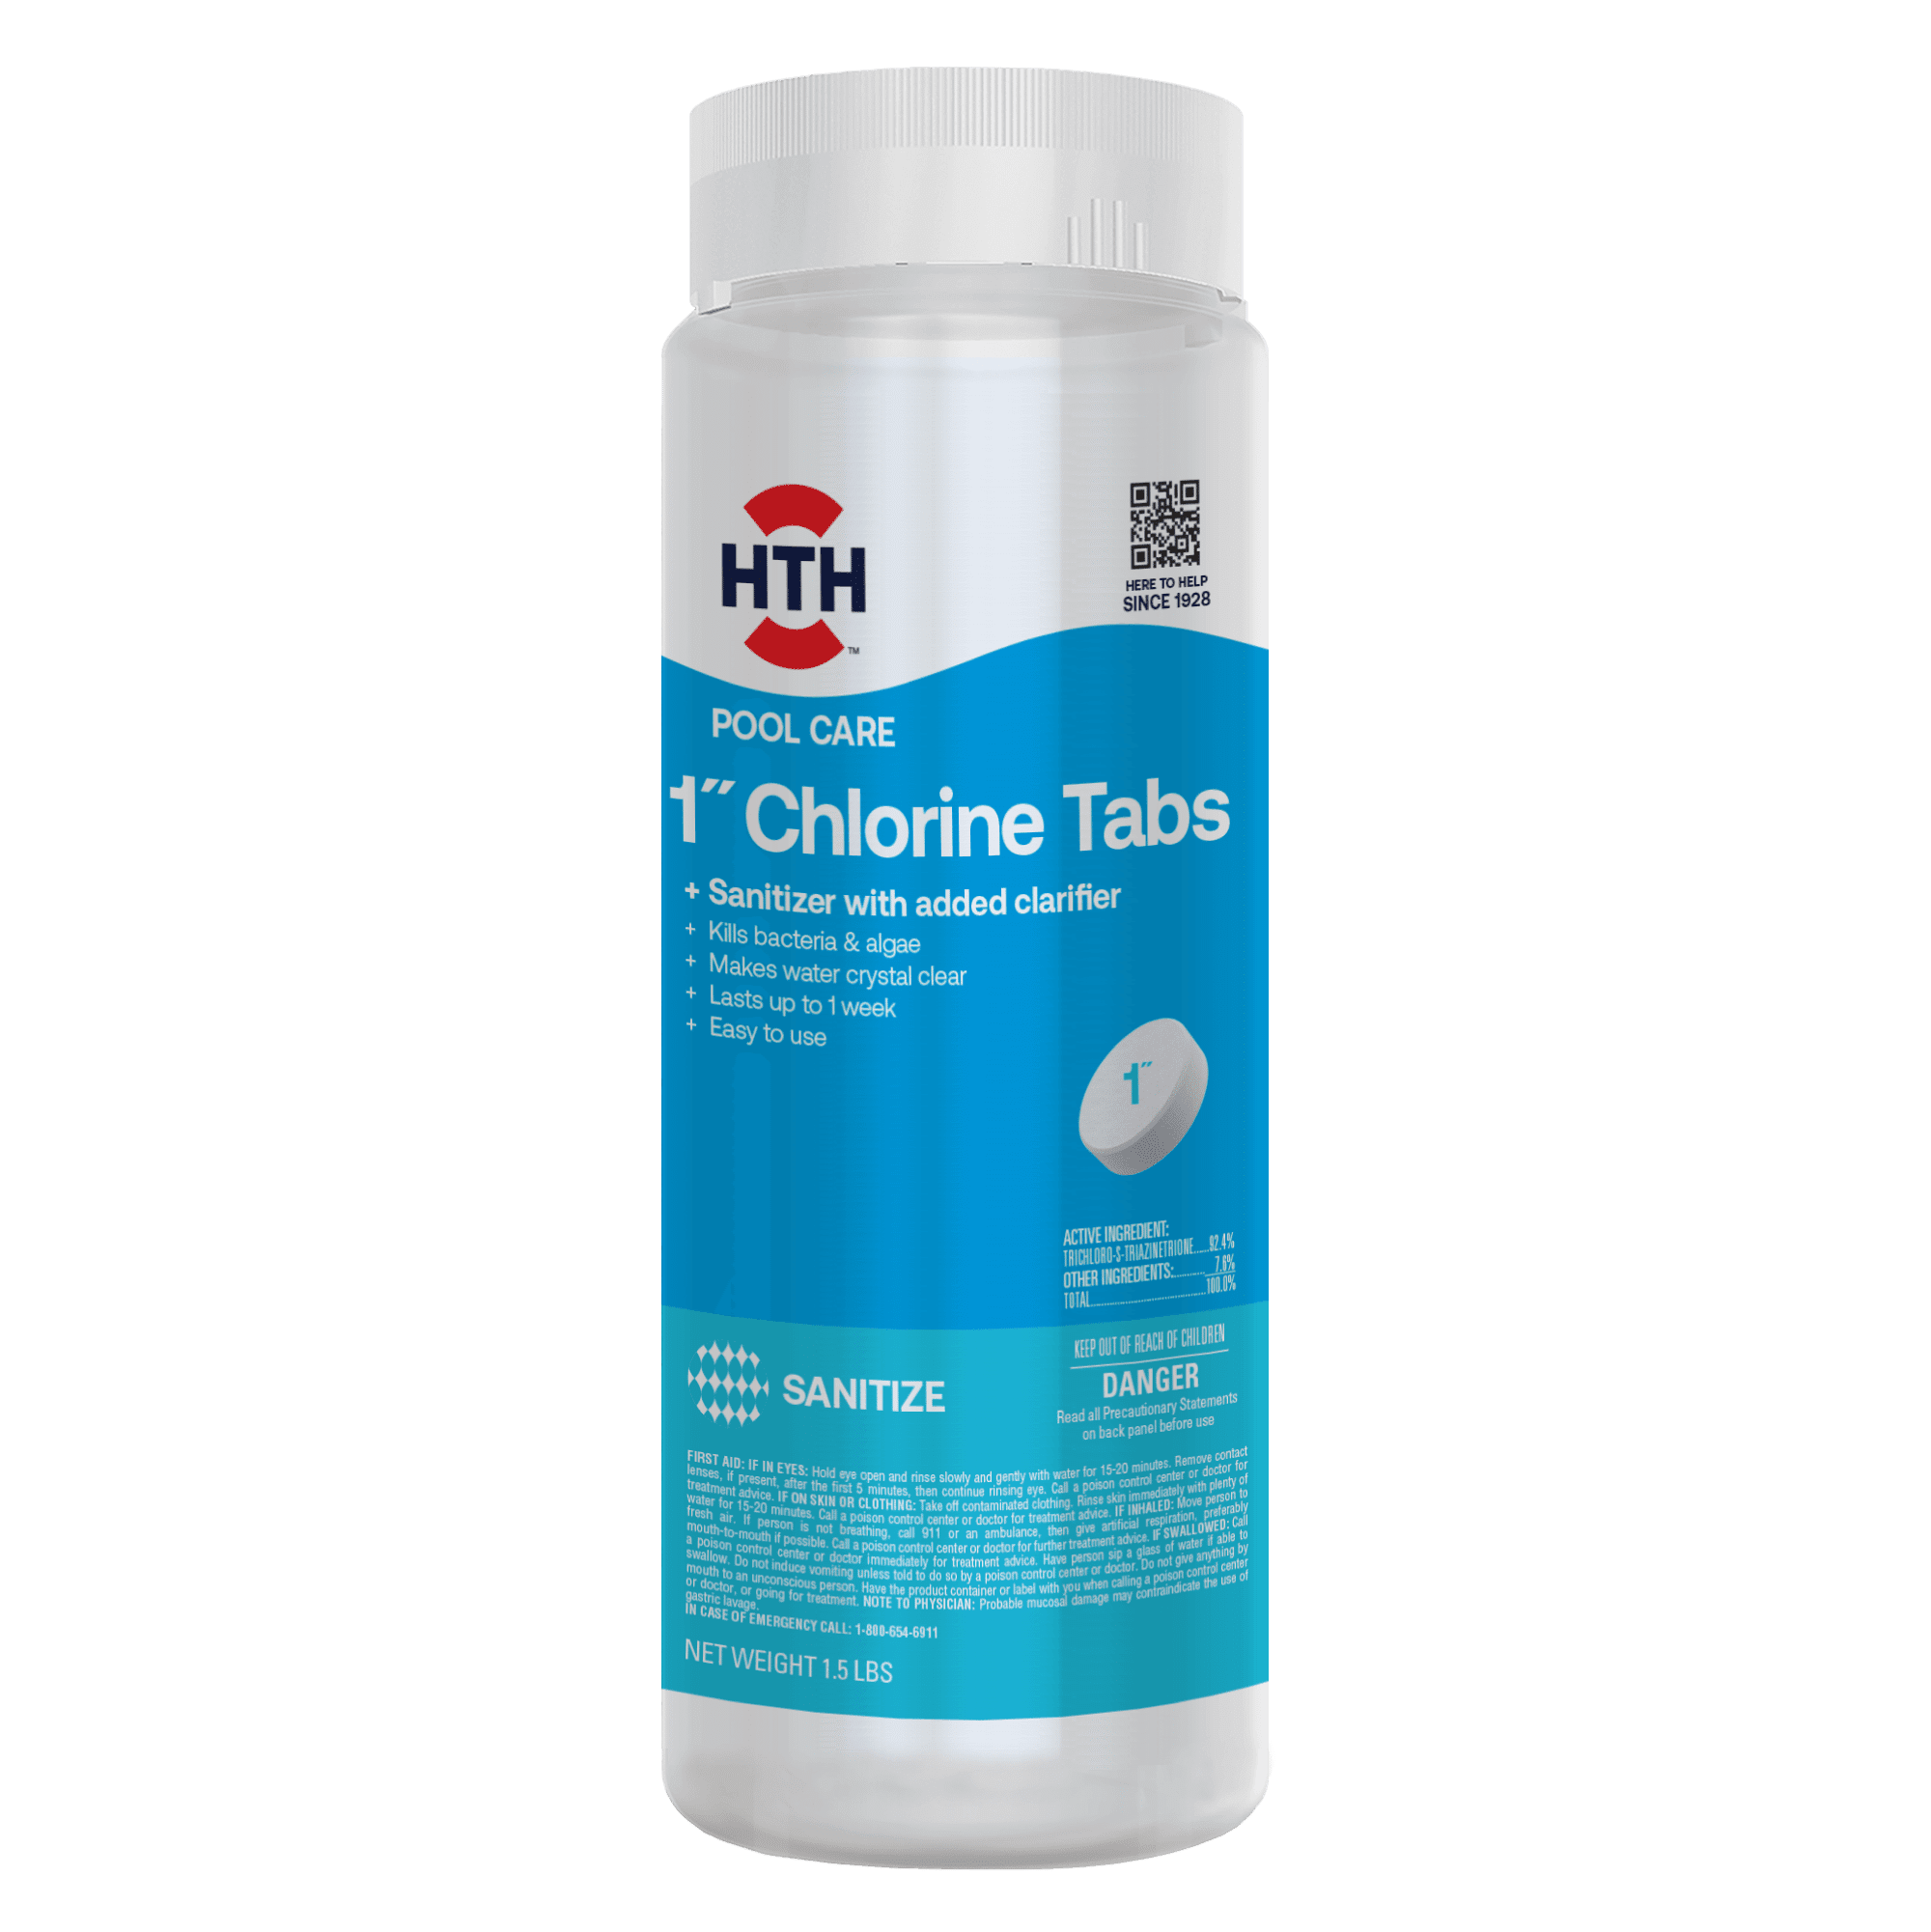 HTH Pool Care  1" Chlorine Tablets for Swimming Pools, Pool Chemicals, 1.5 lbs.